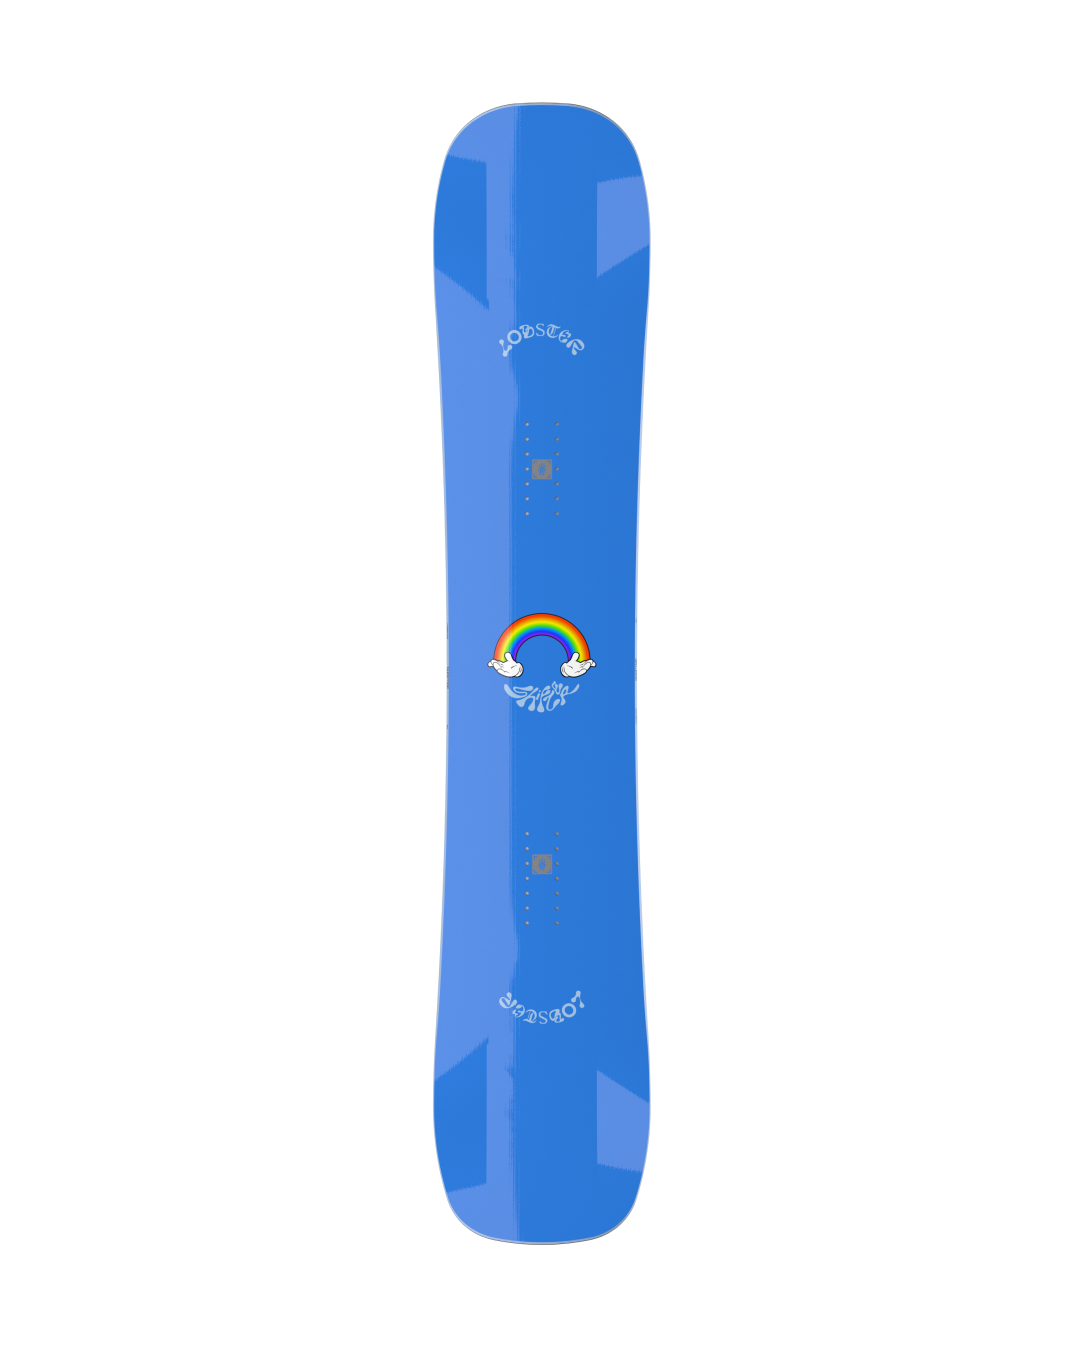 Shifter lobstersnowboards 2023-2024 snowboarding product image'